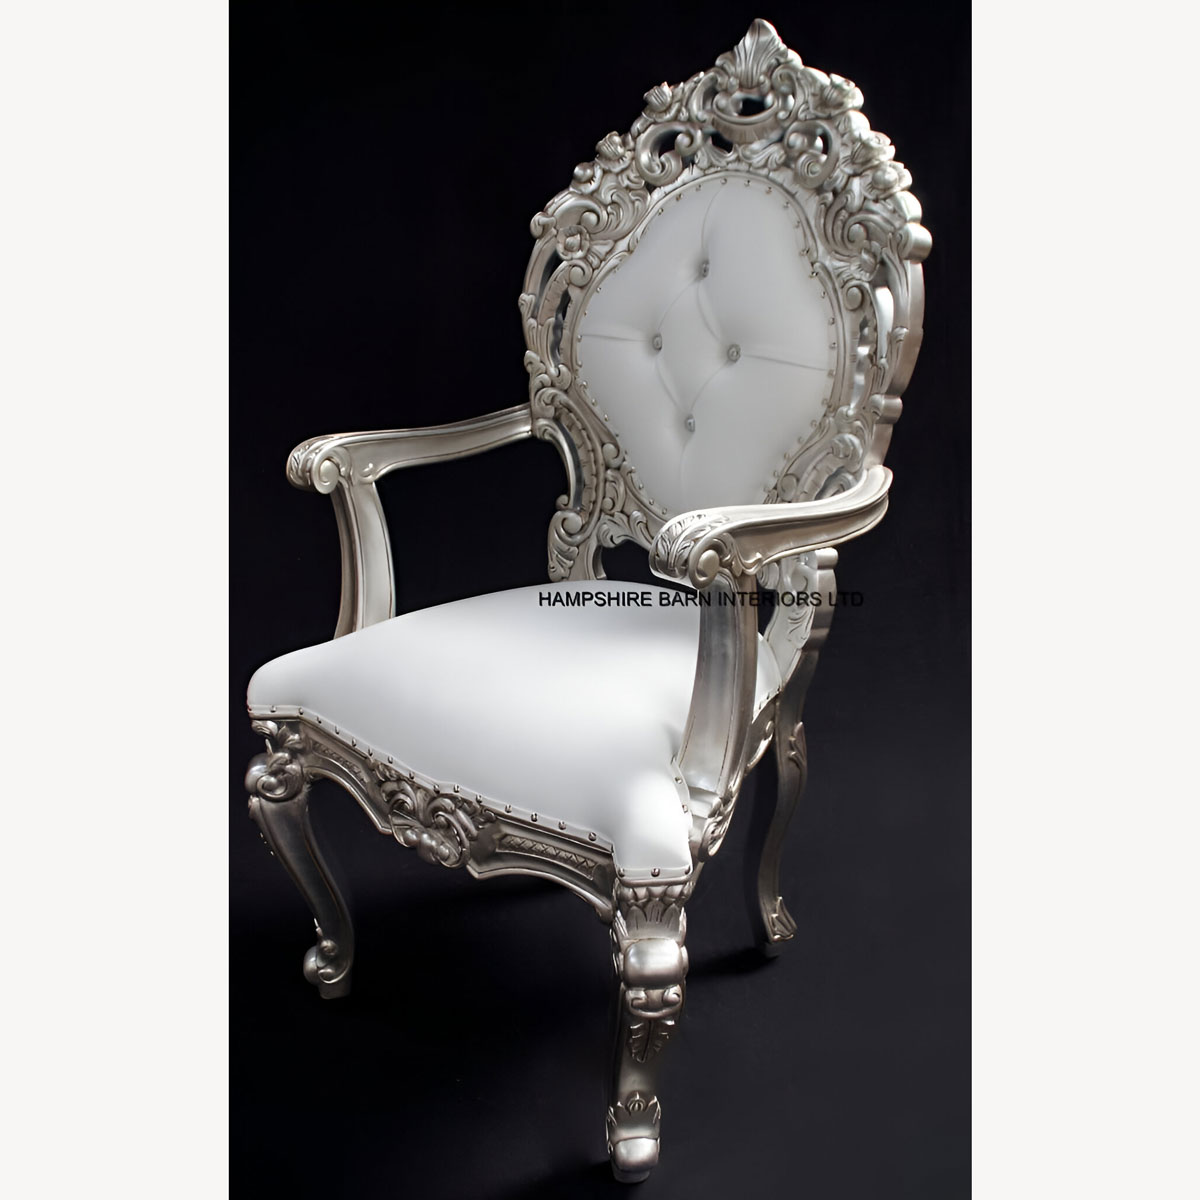 Ornate Royal Palace Throne Chair In Silver Leaf Frame And White Faux Leather With Crystal Buttons 1 - Hampshire Barn Interiors - Ornate Royal Palace Throne Chair In Silver Leaf Frame And White Faux Leather With Crystal Buttons -